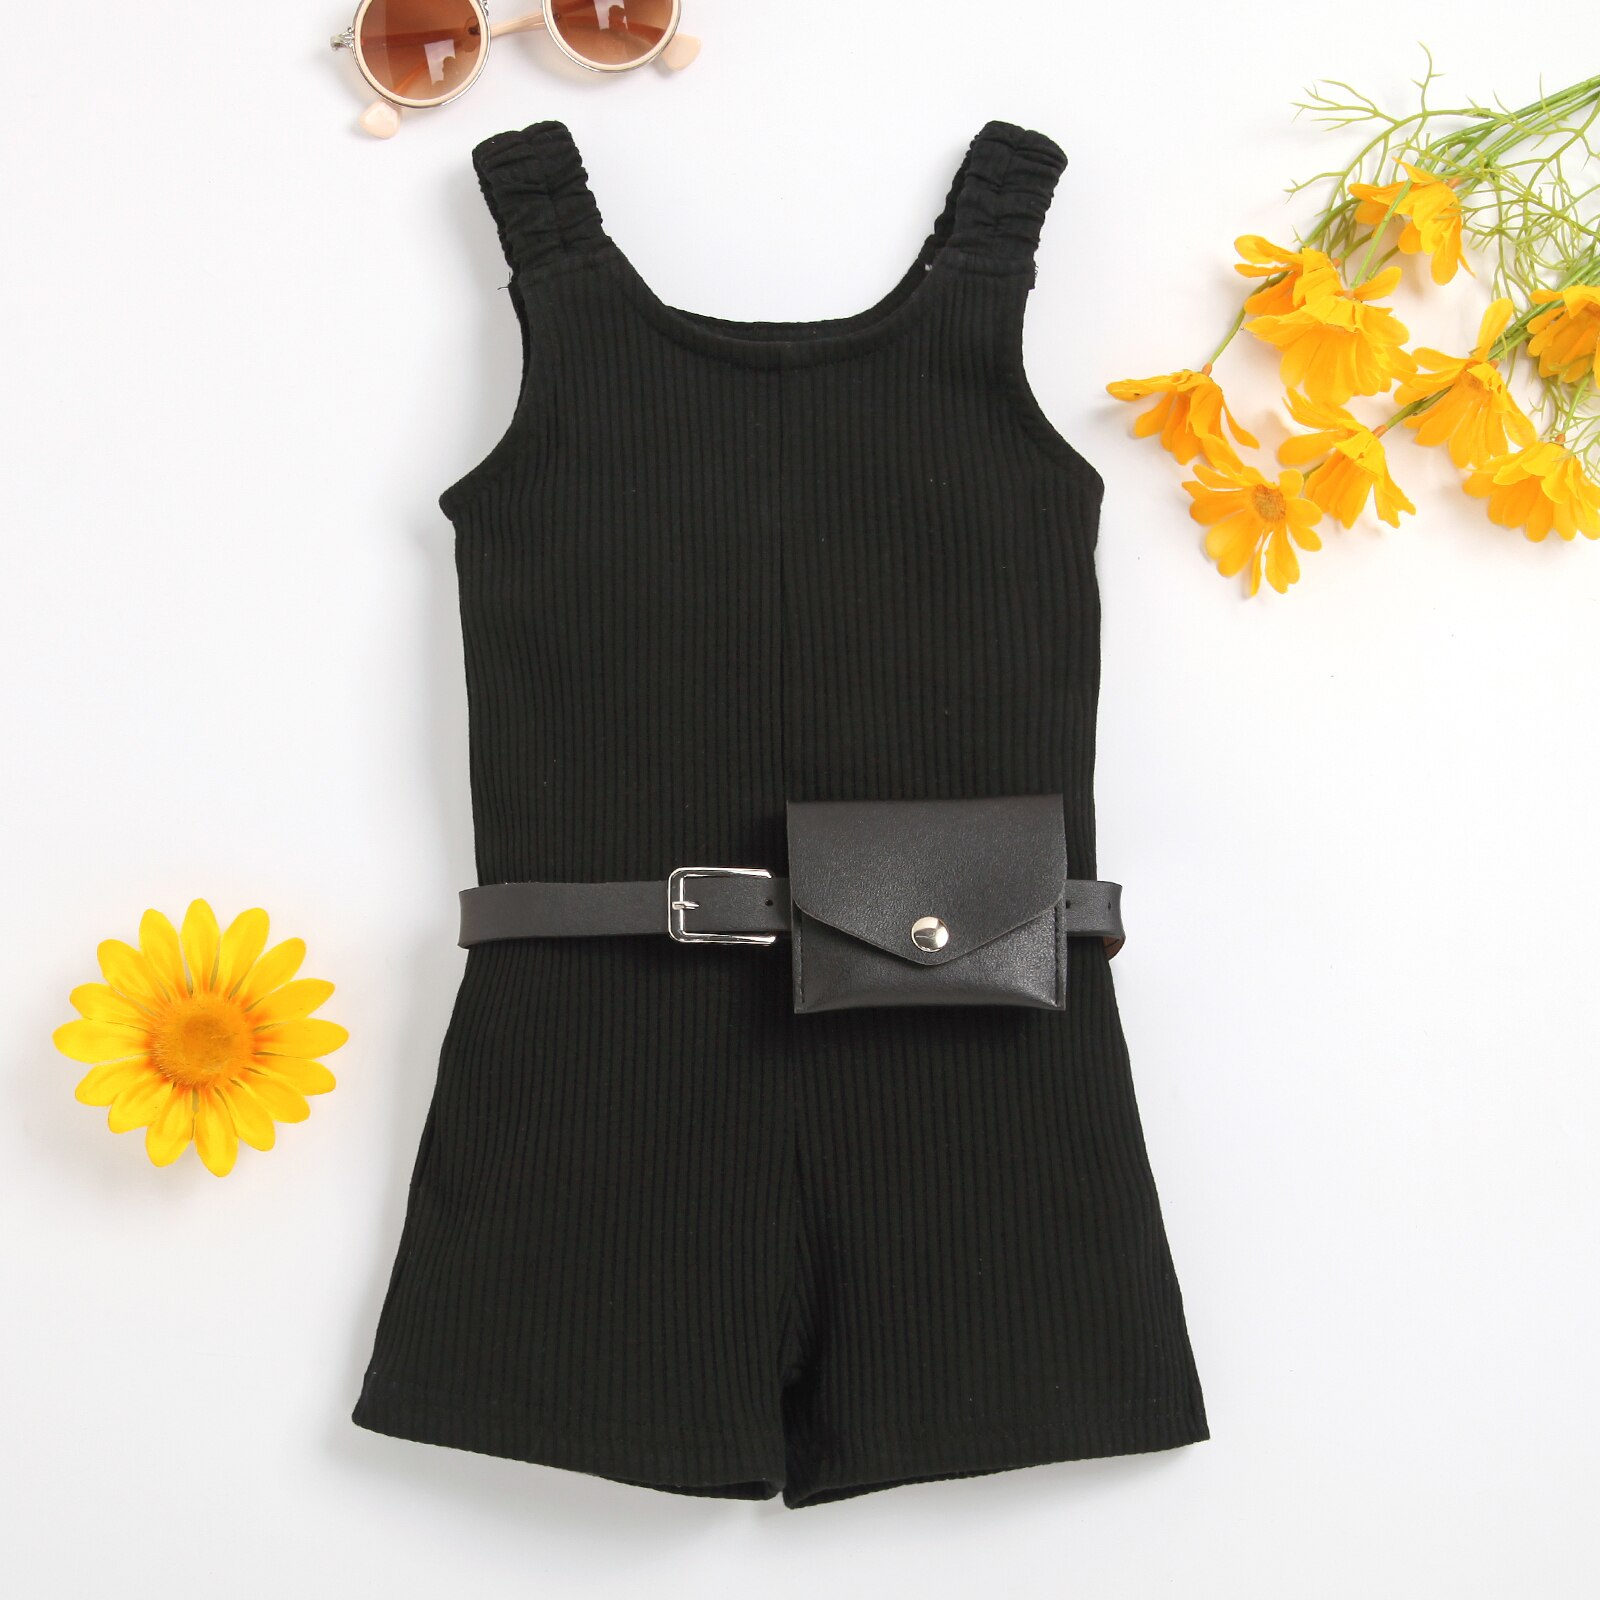 Infant-Kids-Baby-Girl-s-Jumpsuit-Set-Wide-Strap-Sleeveless-Ribbed-Short-Playsuit-Ribbed-Jumpsuit-Waist-5